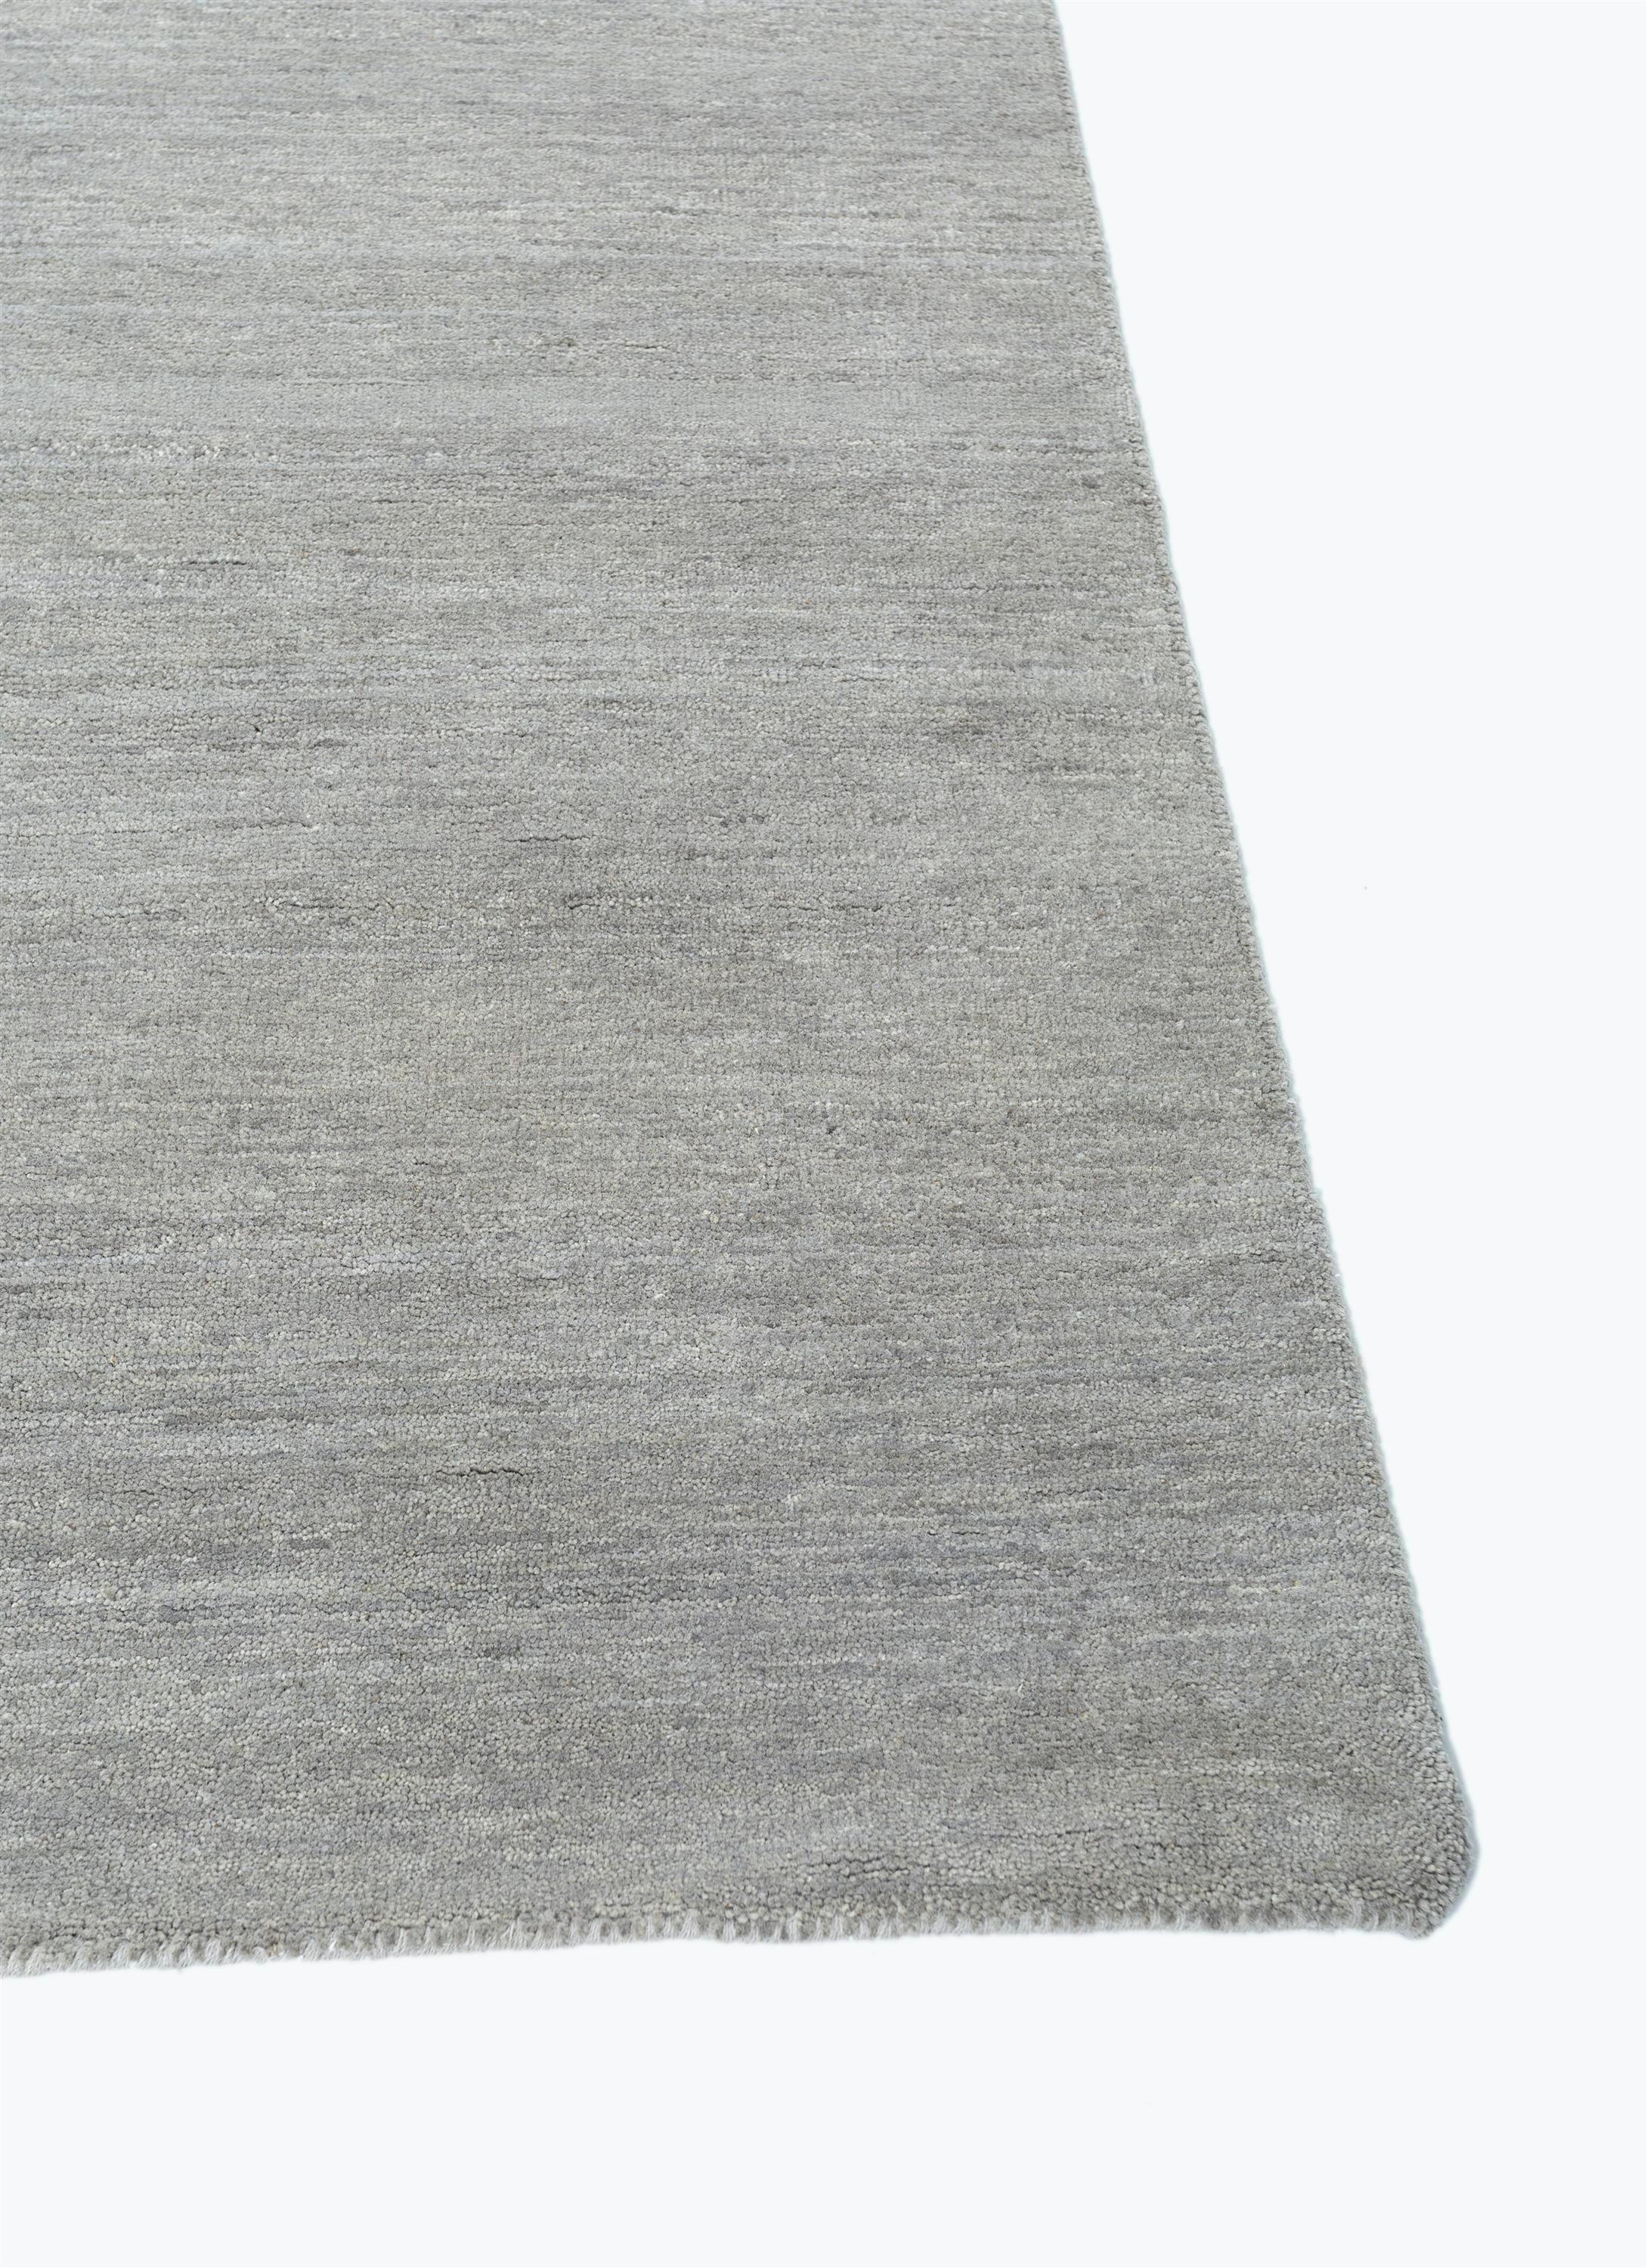 Immerse yourself in the timeless elegance of this hand-knotted rug that paints a canvas of serenity and reflection. The ashwood ground and honey border evoke a palette of nature's tranquility. This modern masterpiece invites a moment of pause, a